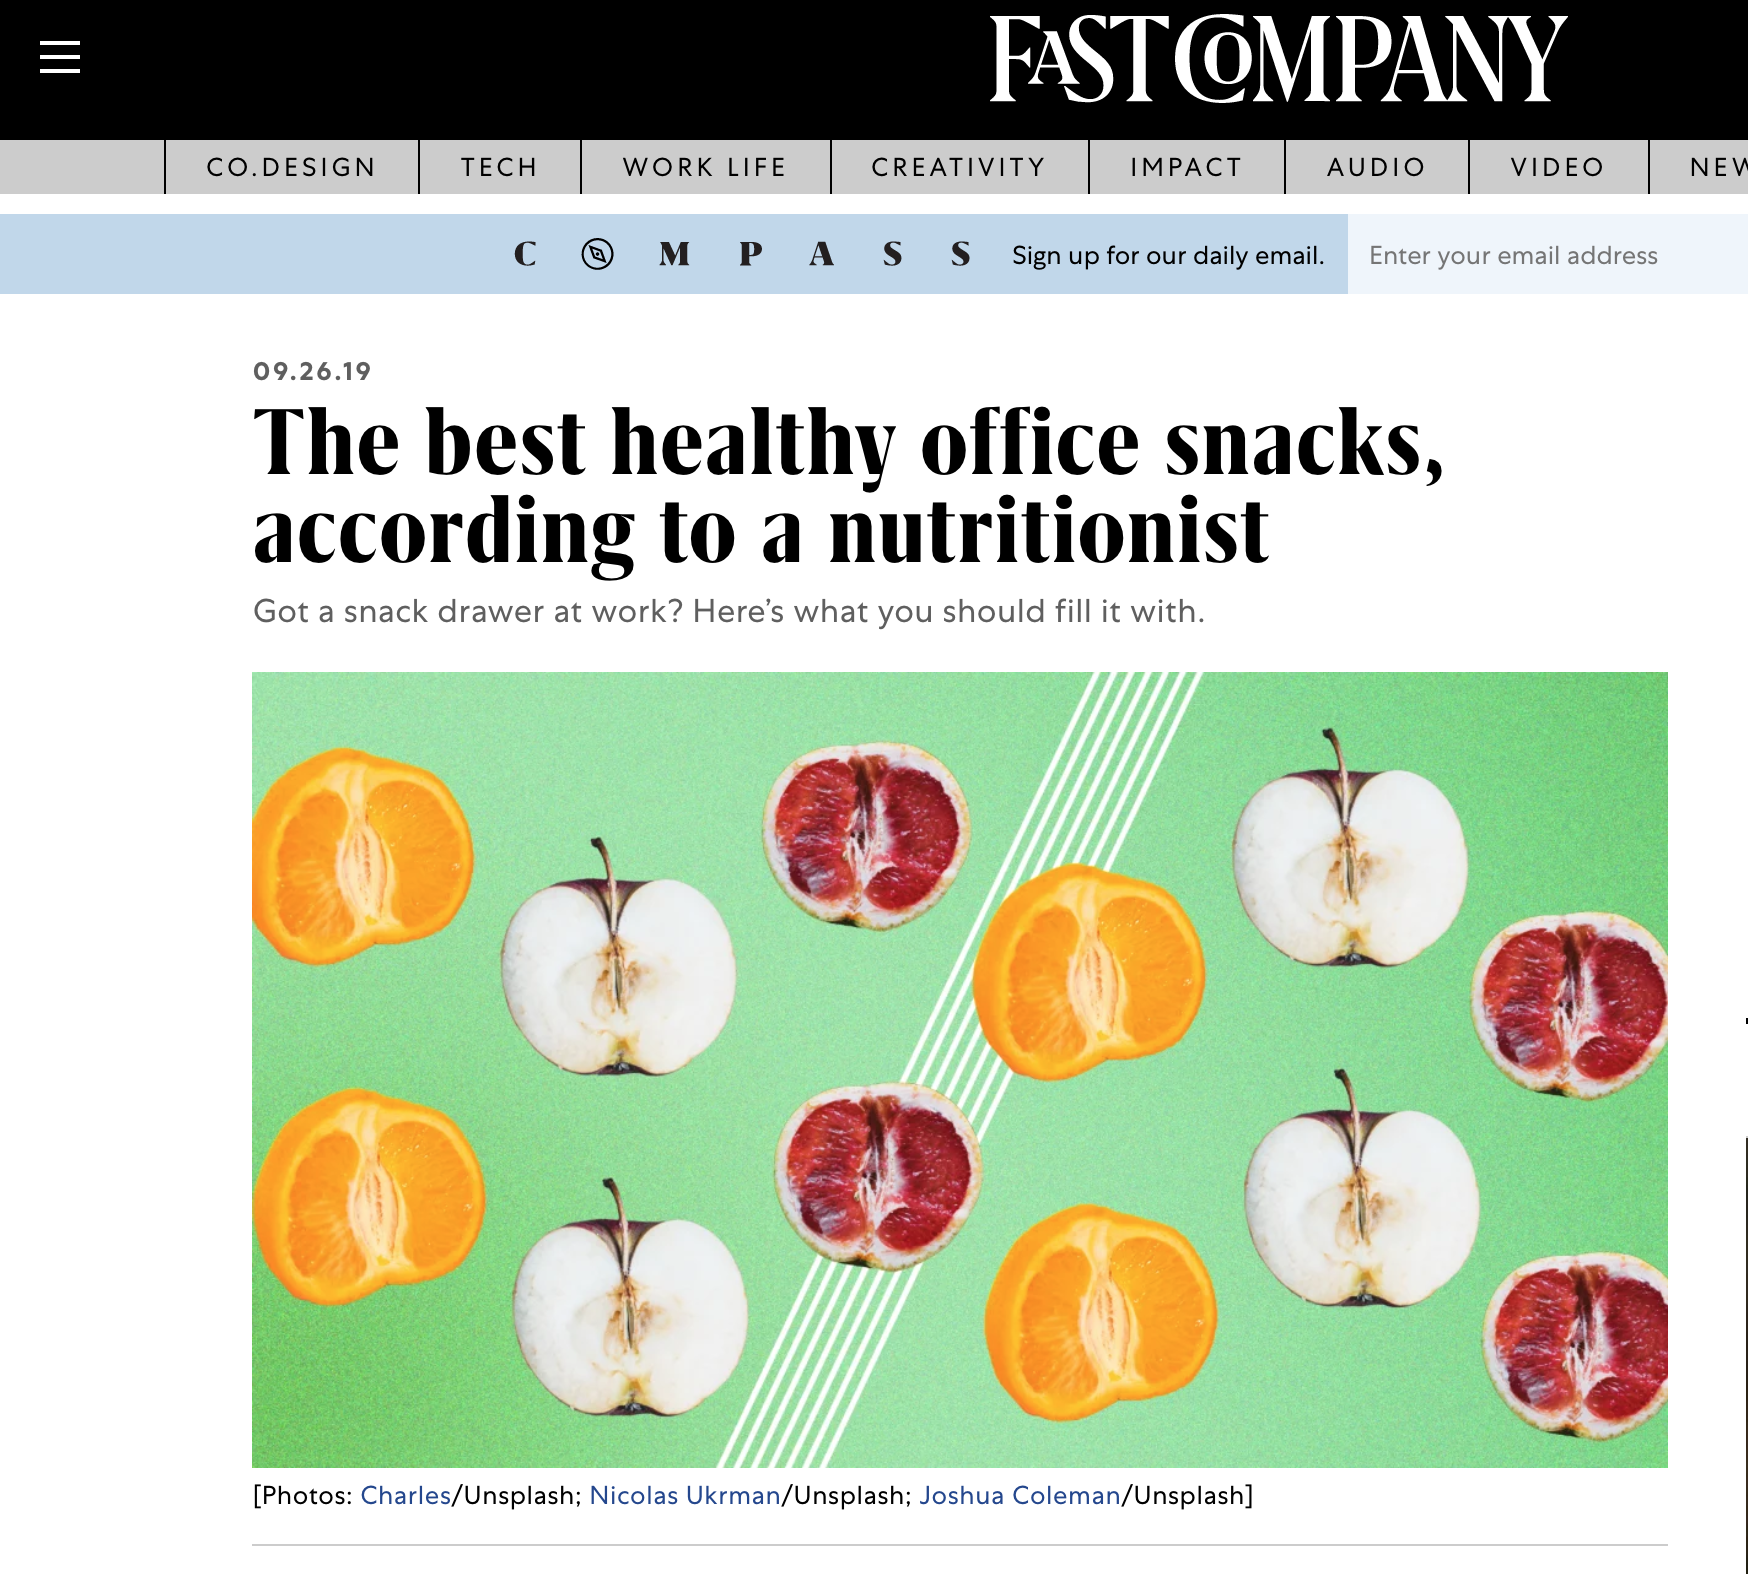 Snack ideas for Fast Company